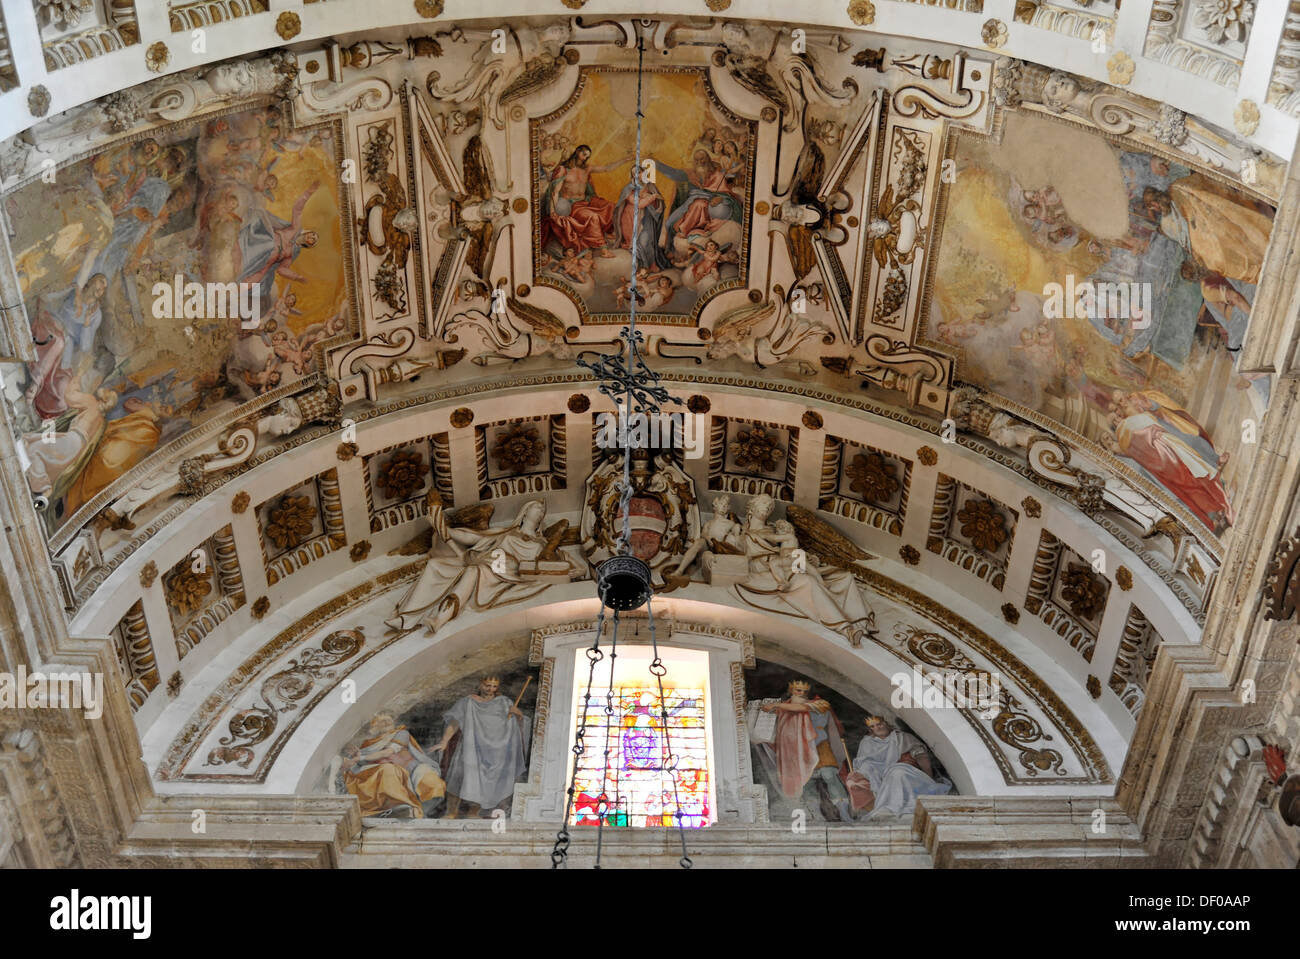 Vaulted ceiling, ceiling paintings, Renaissance pilgrimage Church of ...